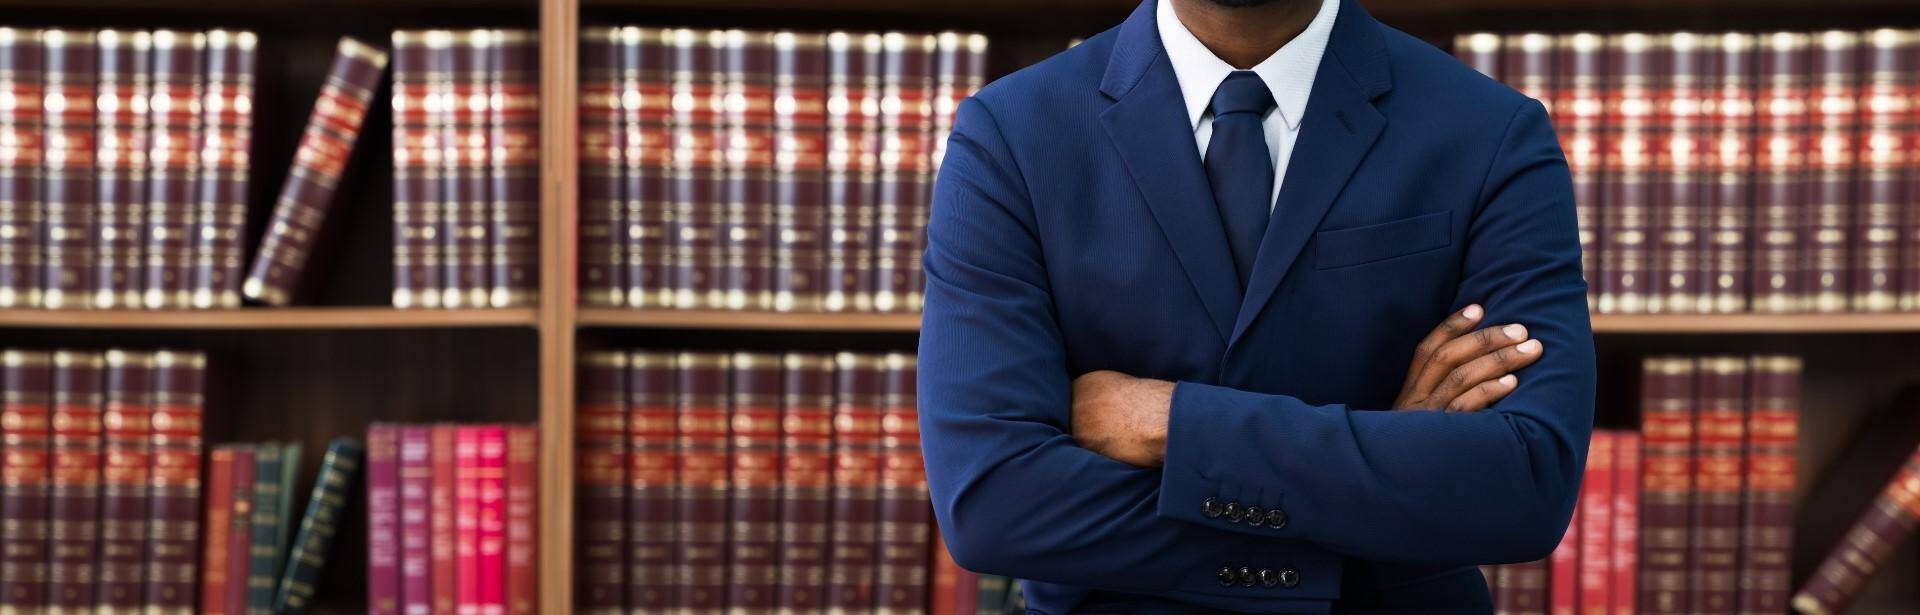 A black lawyer standing in front of a bookshelf of law book in Peachtree Corners, Georgia